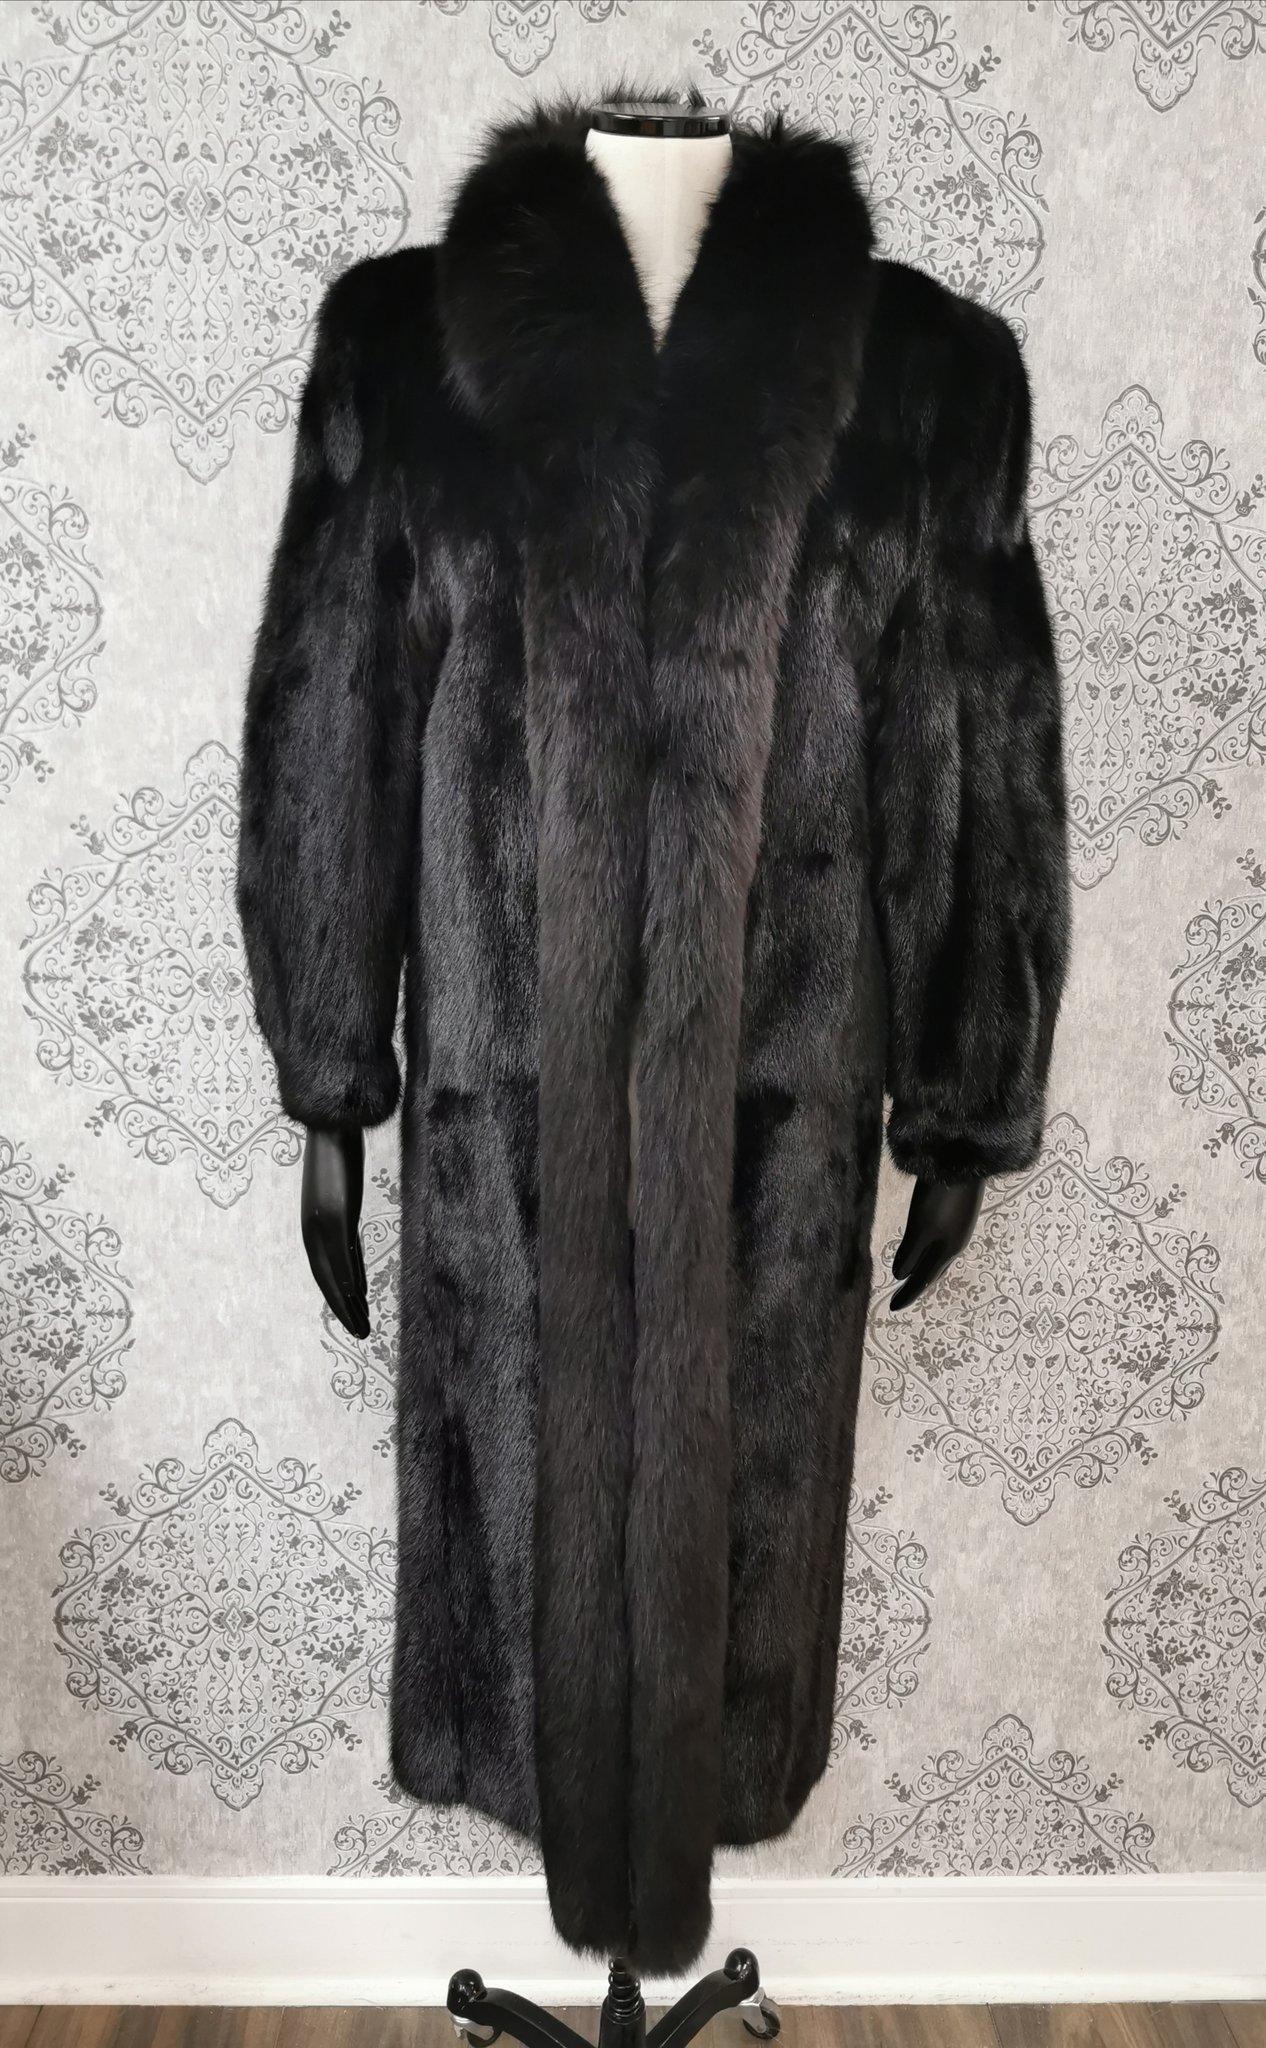 DESCRIPTION : 199 PITCH BLACK MINK FUR COAT WITH DYED SHADOW FOX TRIM SIZE 10 :

Tuxedo collar, supple skins,beautiful fresh fur, european german clasps for closure, too slit pockets, nice big full pelts skins in excellent condition.

Brand : Eaton